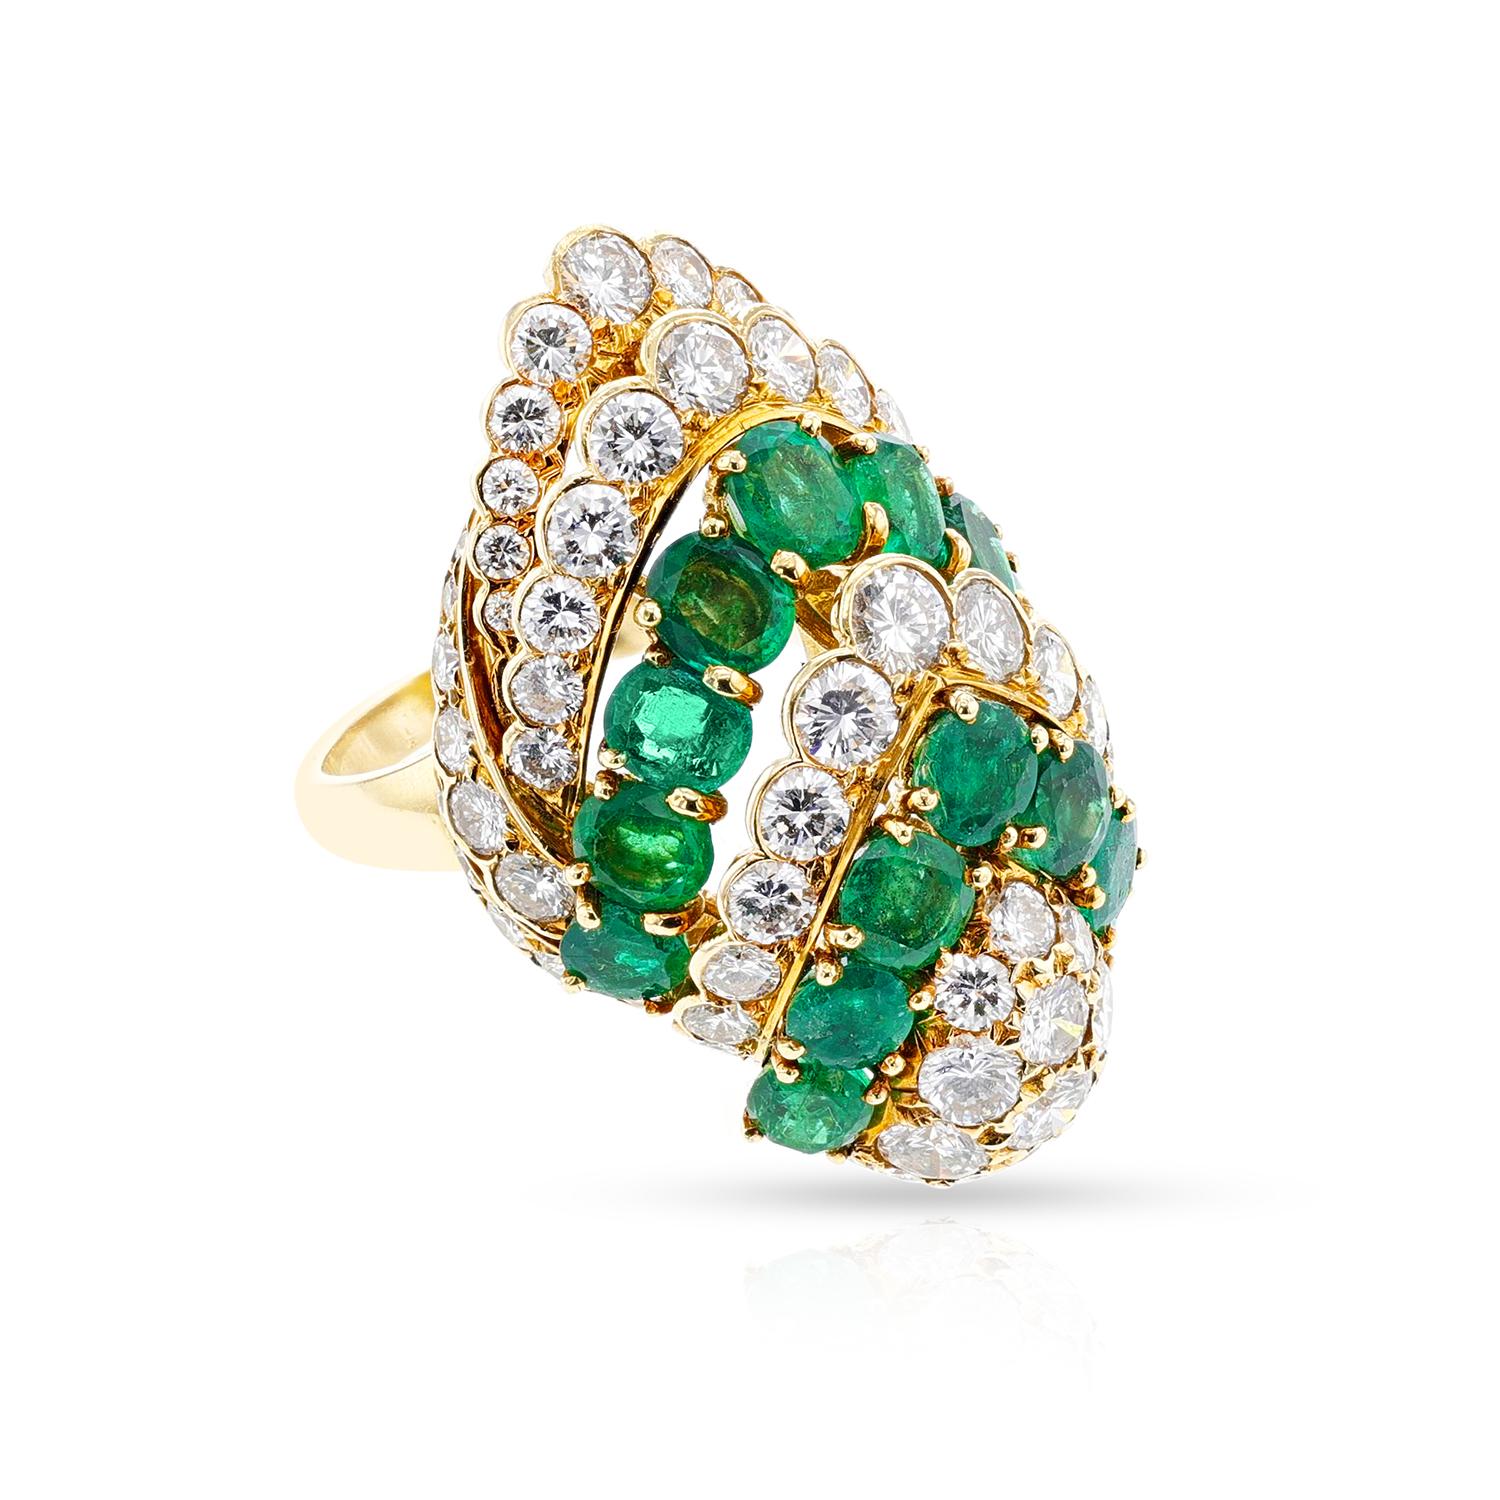 This stunning Bvlgari Emerald and Diamond Cocktail Ring is crafted from 18k yellow gold and flaunts beautiful ornamental design. The ring has a combined weight of 17 grams and measures 1.25 x 1.18 inches, and is a size 6.50 US. A Letter of